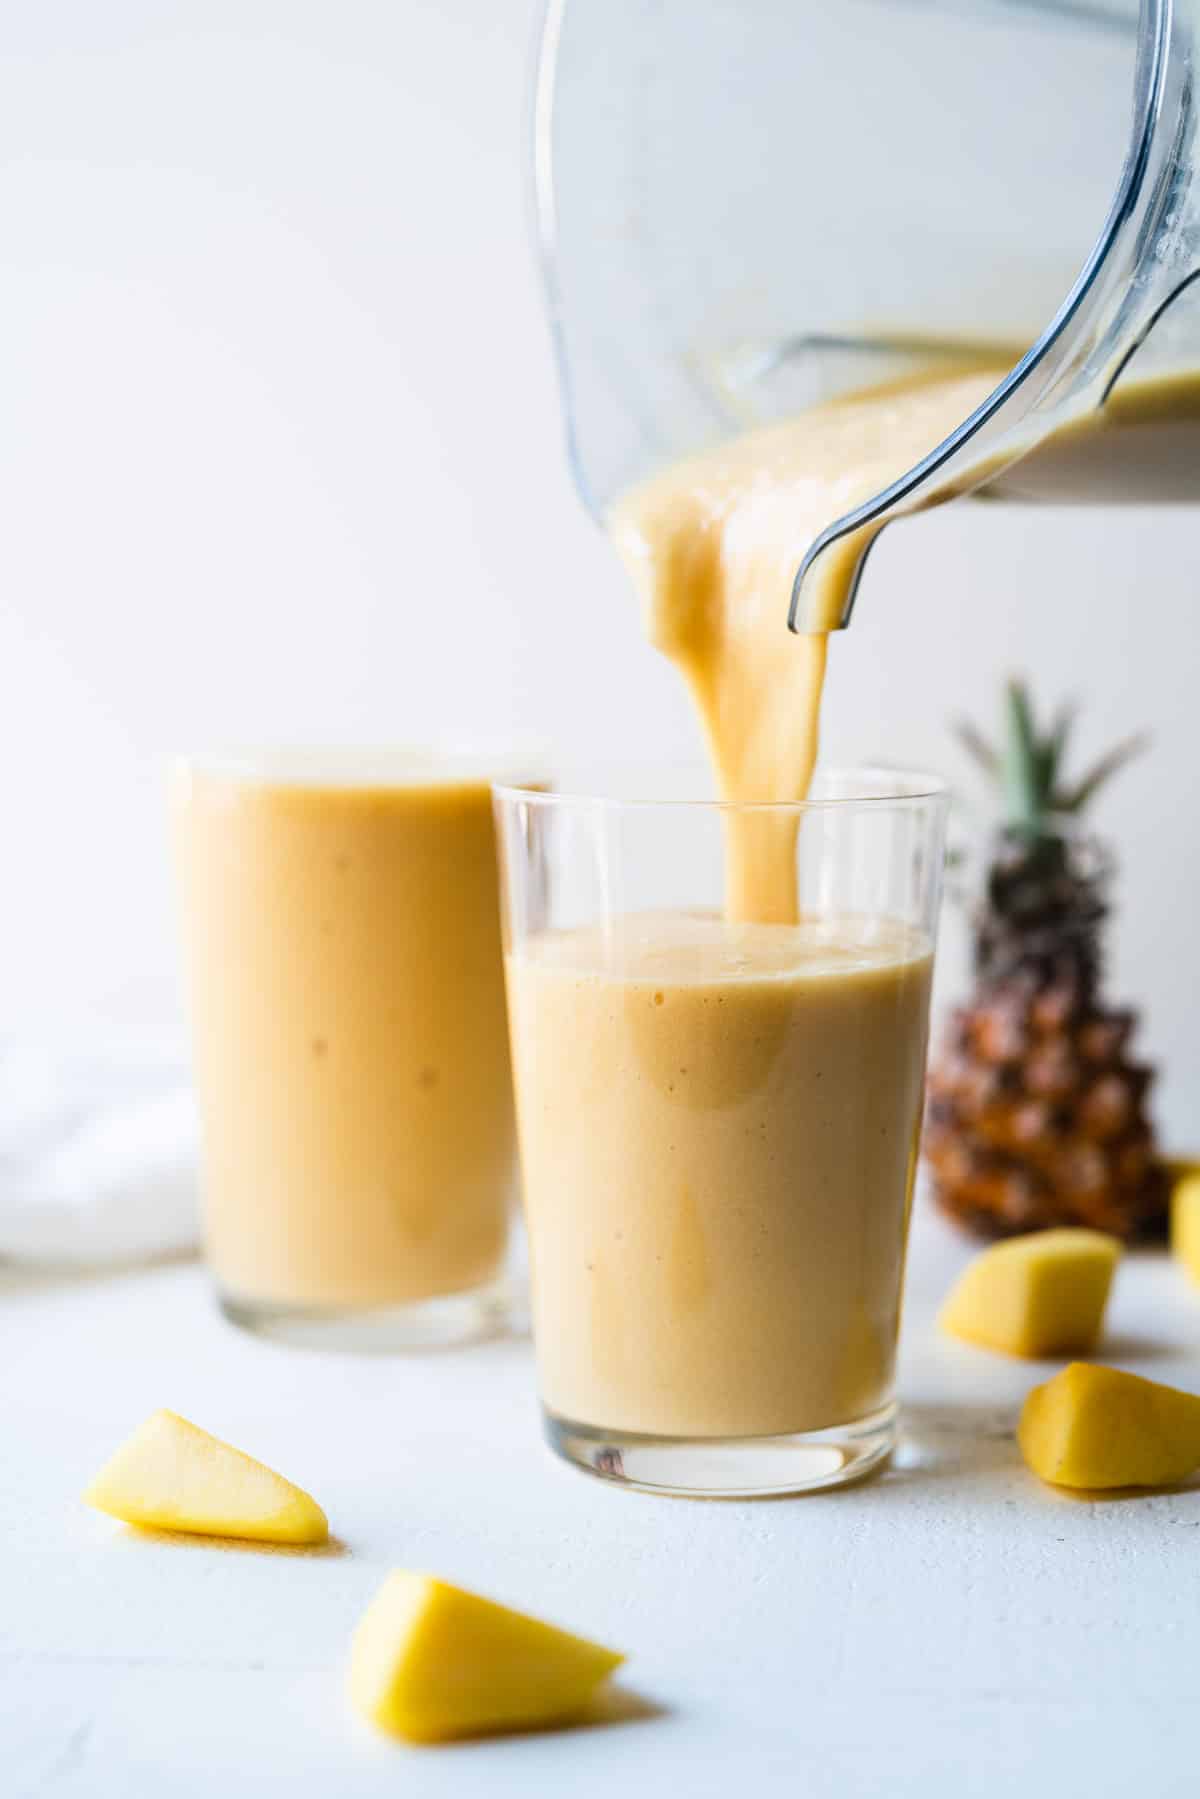 A mango pineapple smoothie being poured from a blender into a clear glass.